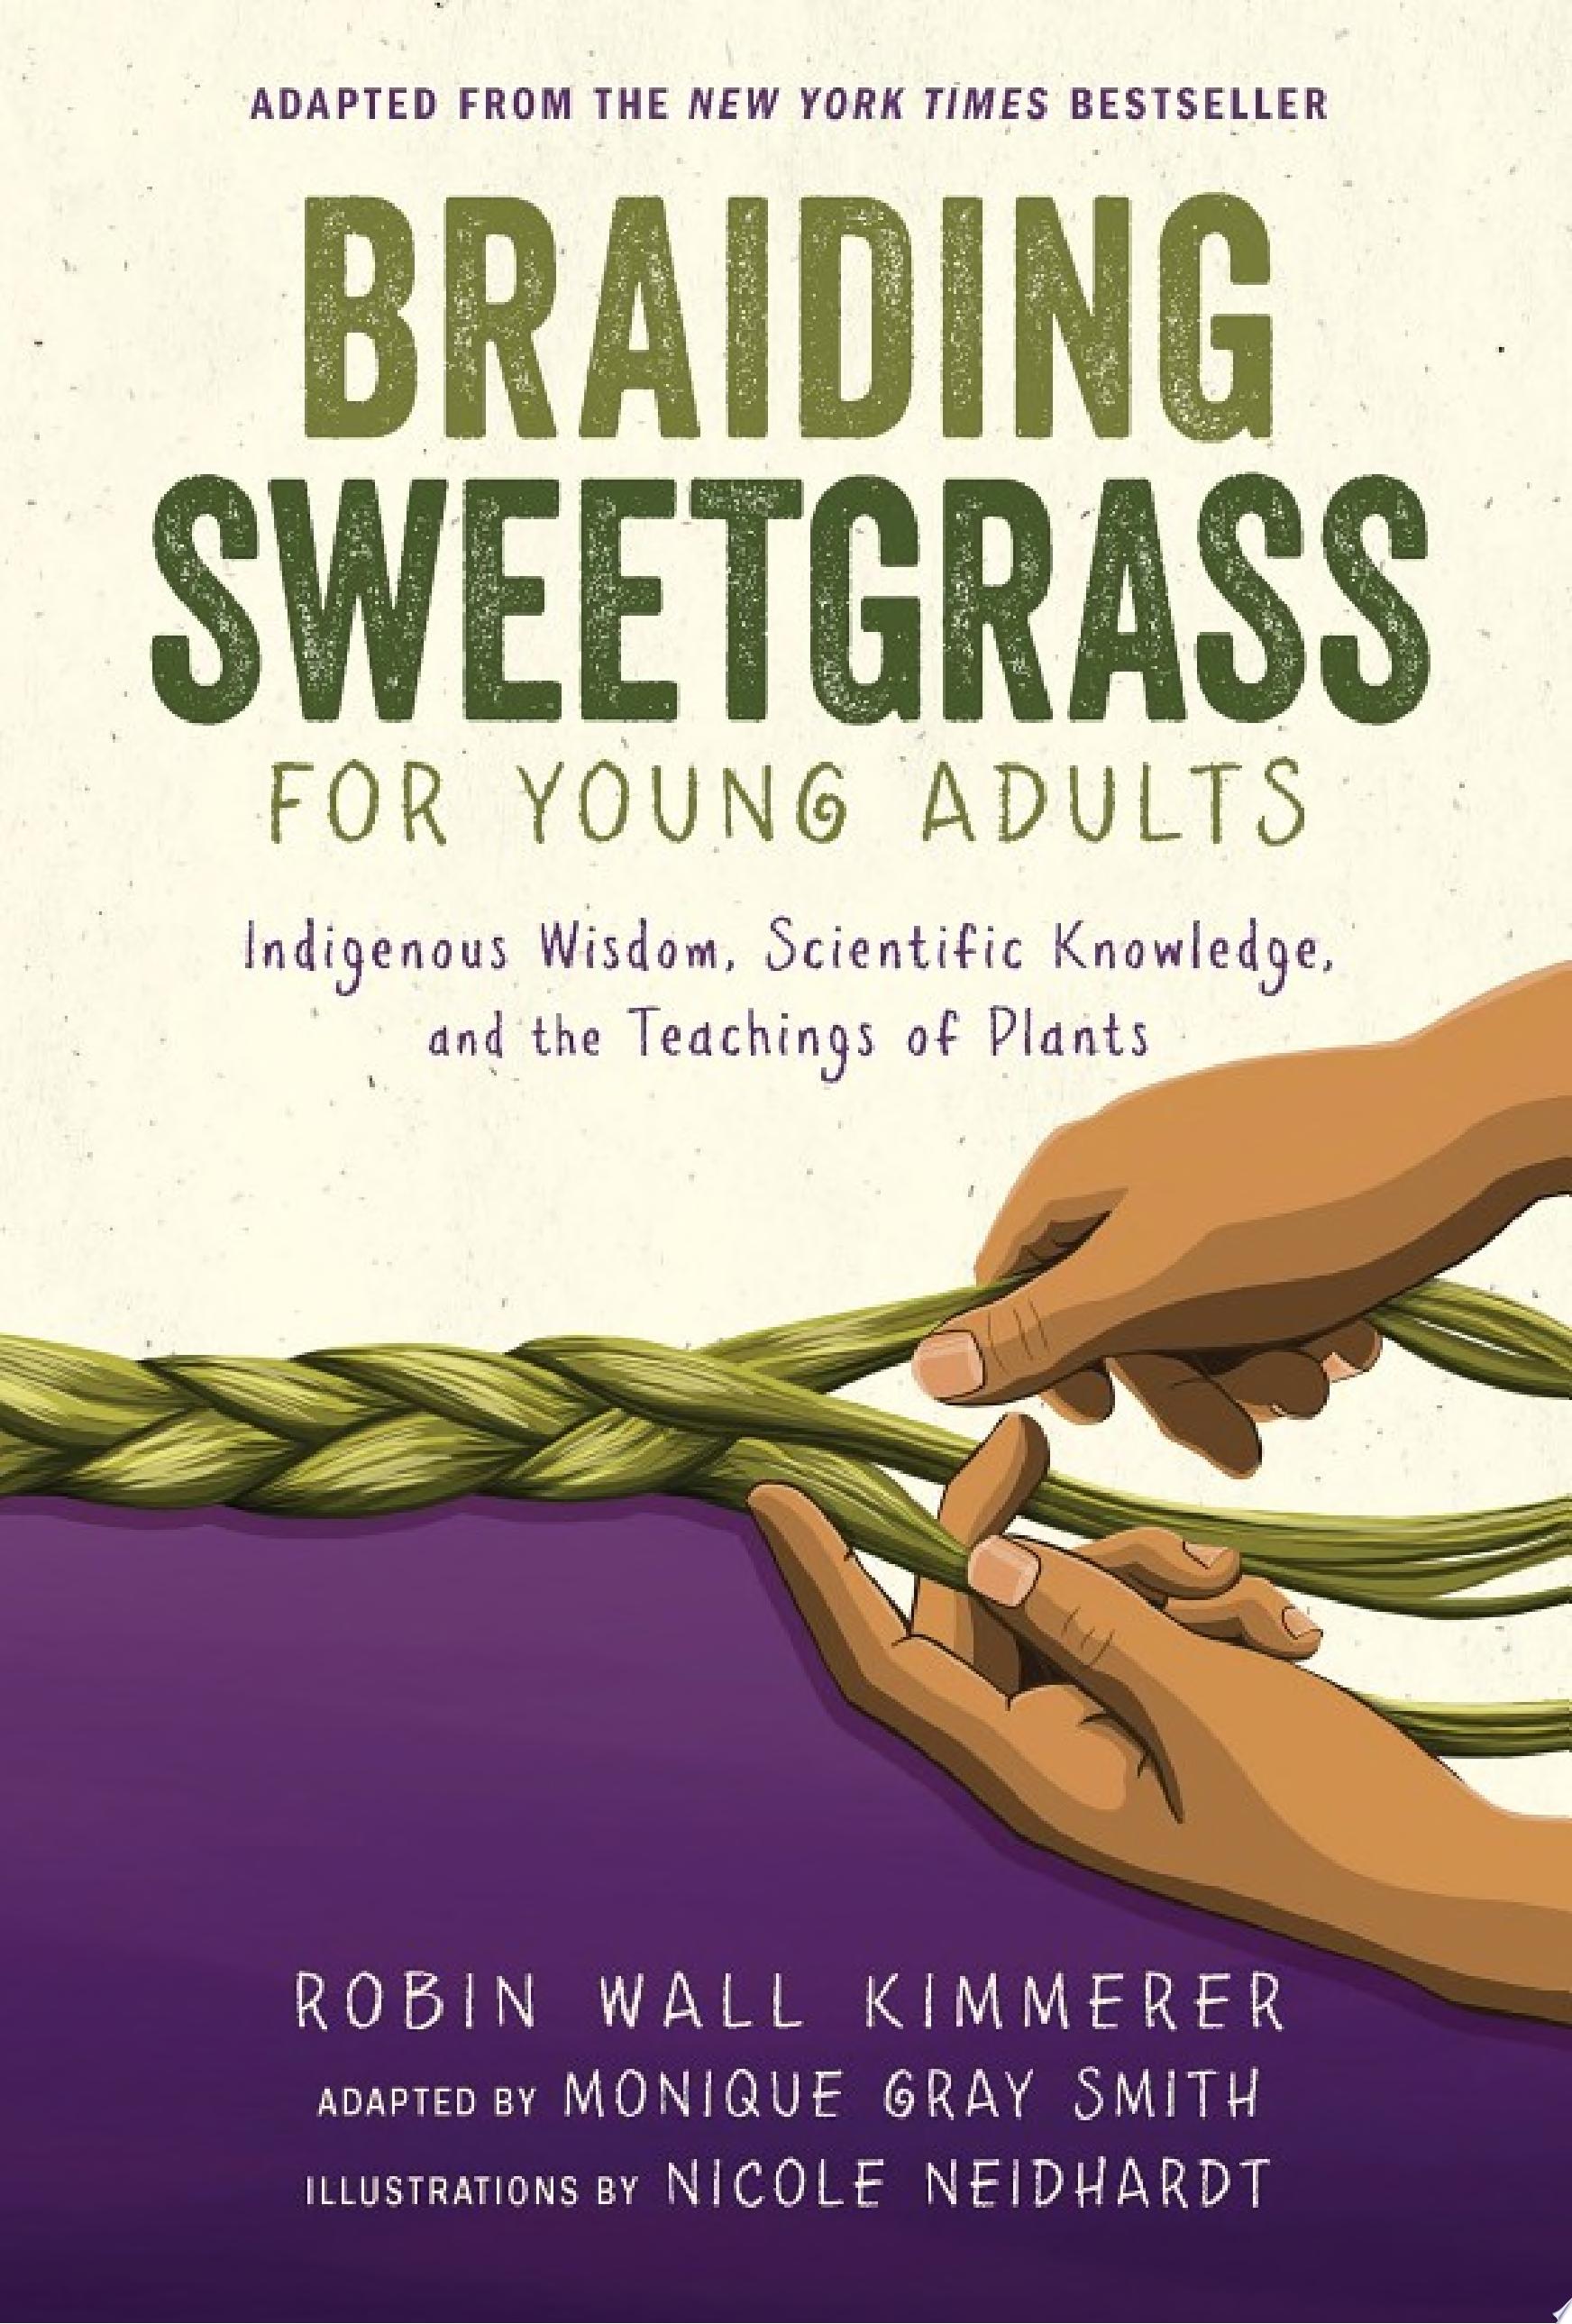 Image for "Braiding Sweetgrass for Young Adults"